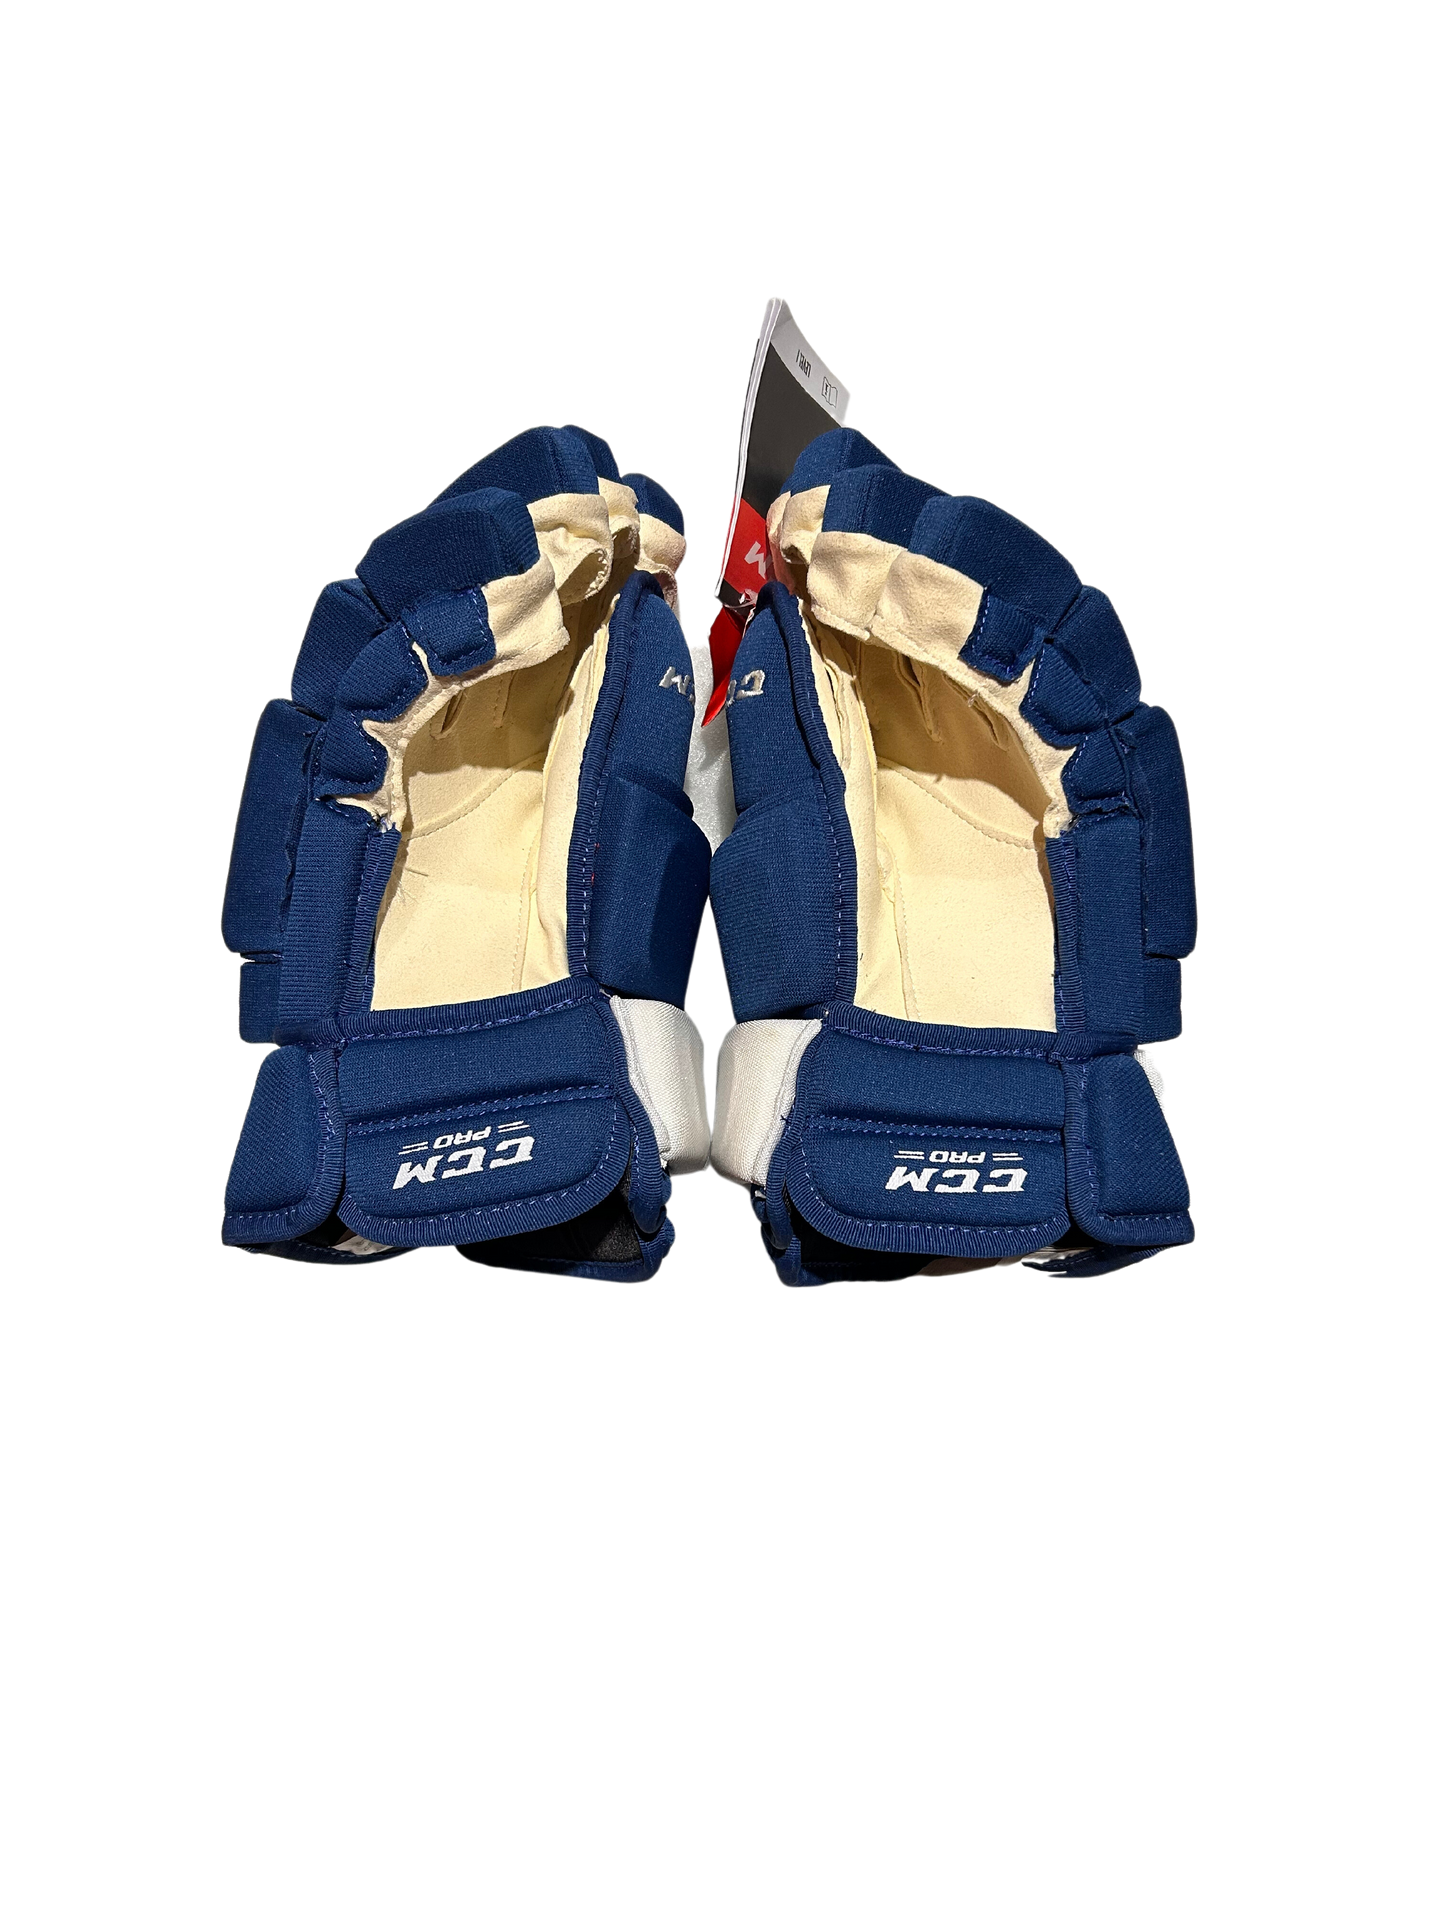 New Player Issued Blue Colorado Avalanche CCM HG97 Gloves (Multiple Sizes)